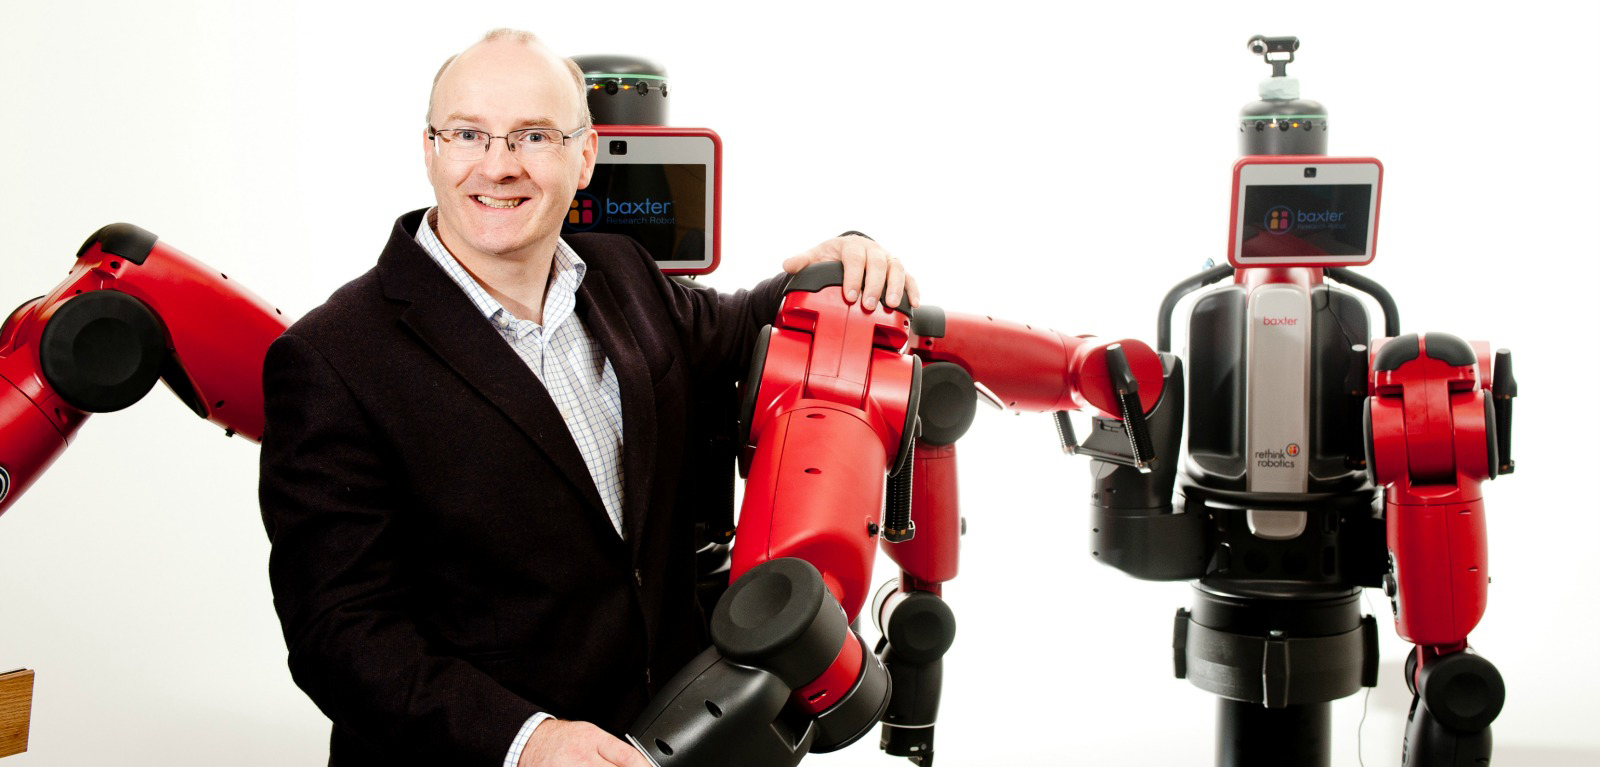 Prof. S.McL with two baxter robots